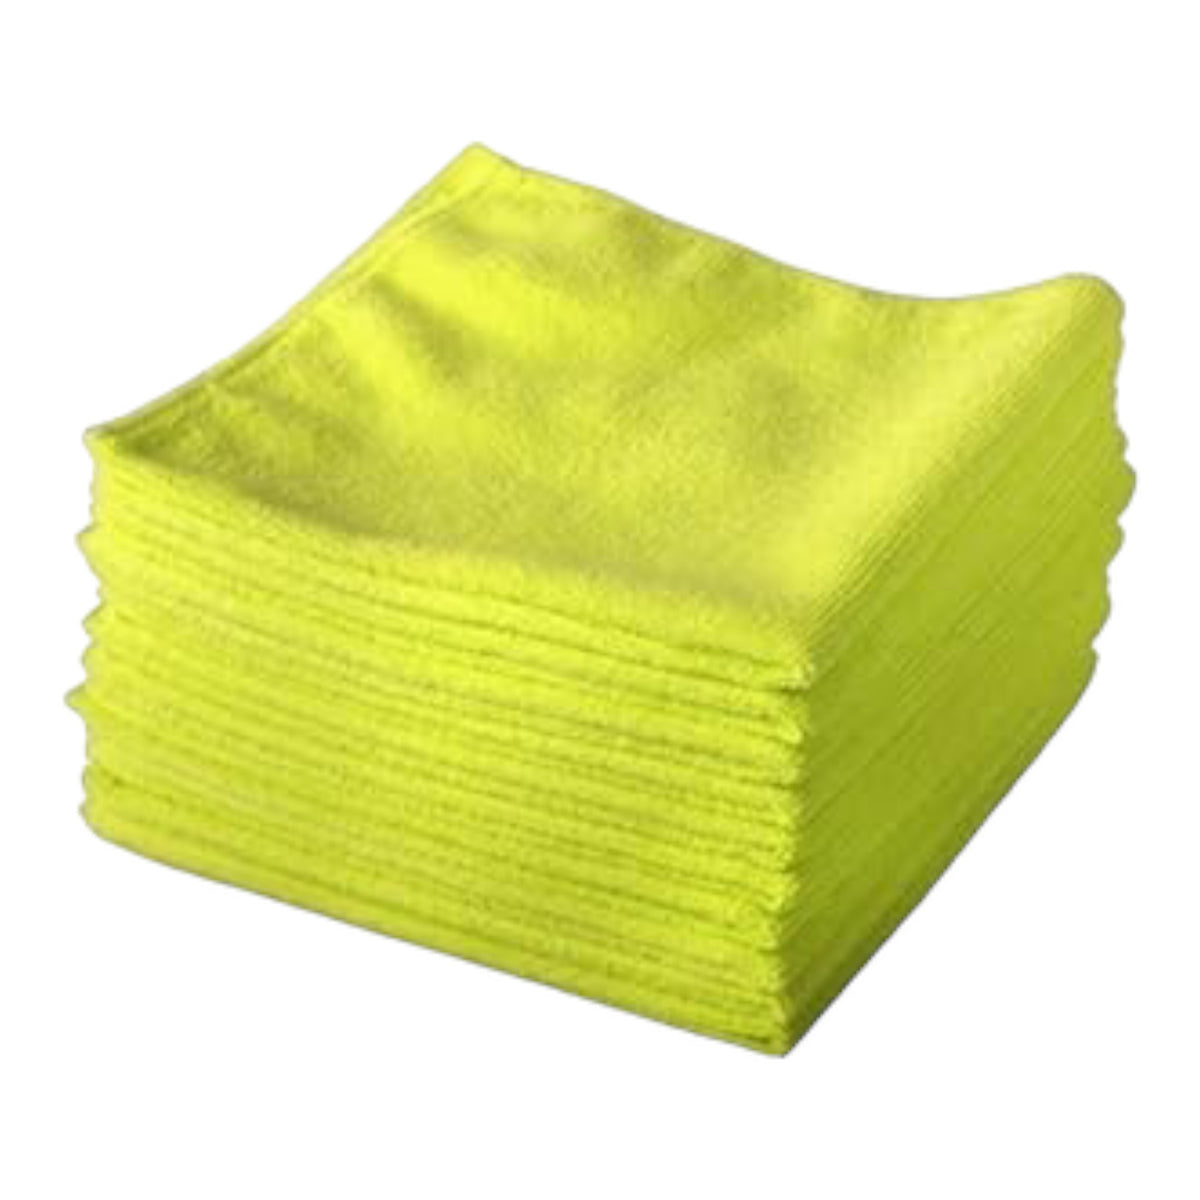 10 Pack of Yellow Lint Free Microfibre Exel Super Magic Cleaning Cloths For Polishing, Washing, Waxing And Dusting